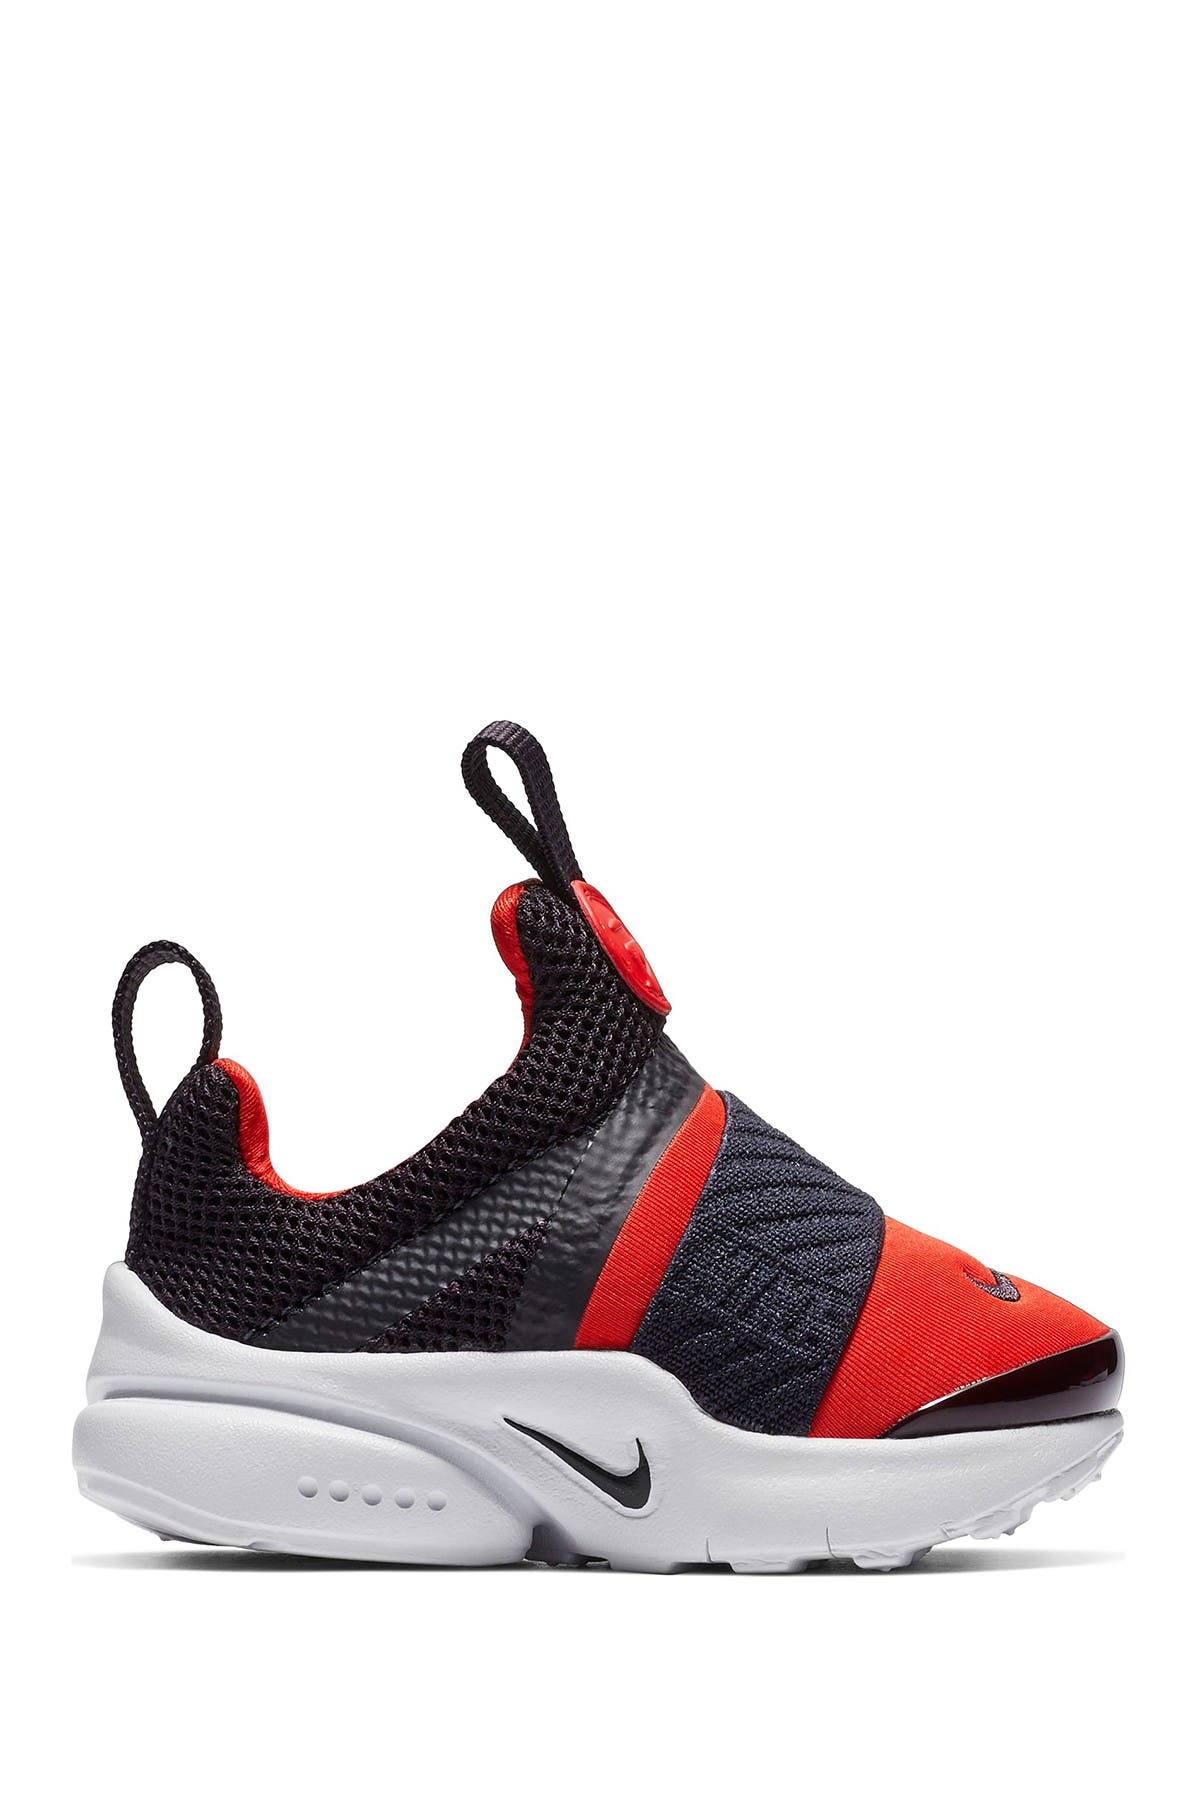 nike presto extreme for adults